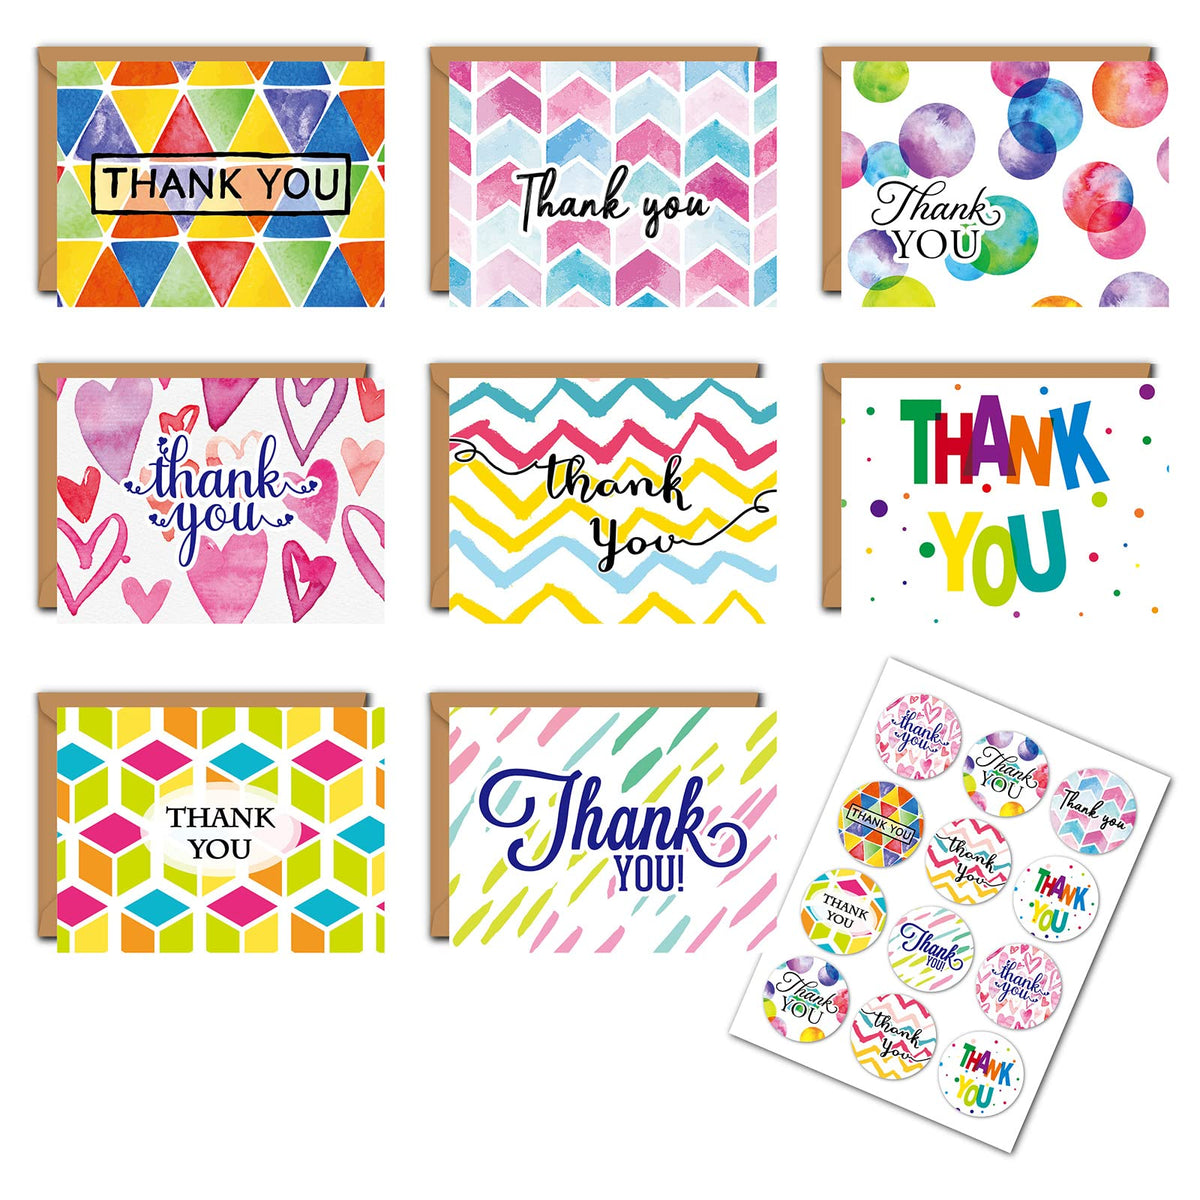 24 Pack Thank You Cards, Thank You Cards Multipack with envelopes Greeting Cards Rainbow Thank You Greeting Cards & Stickers for Wedding Graduation Teacher Birthday Baby Shower